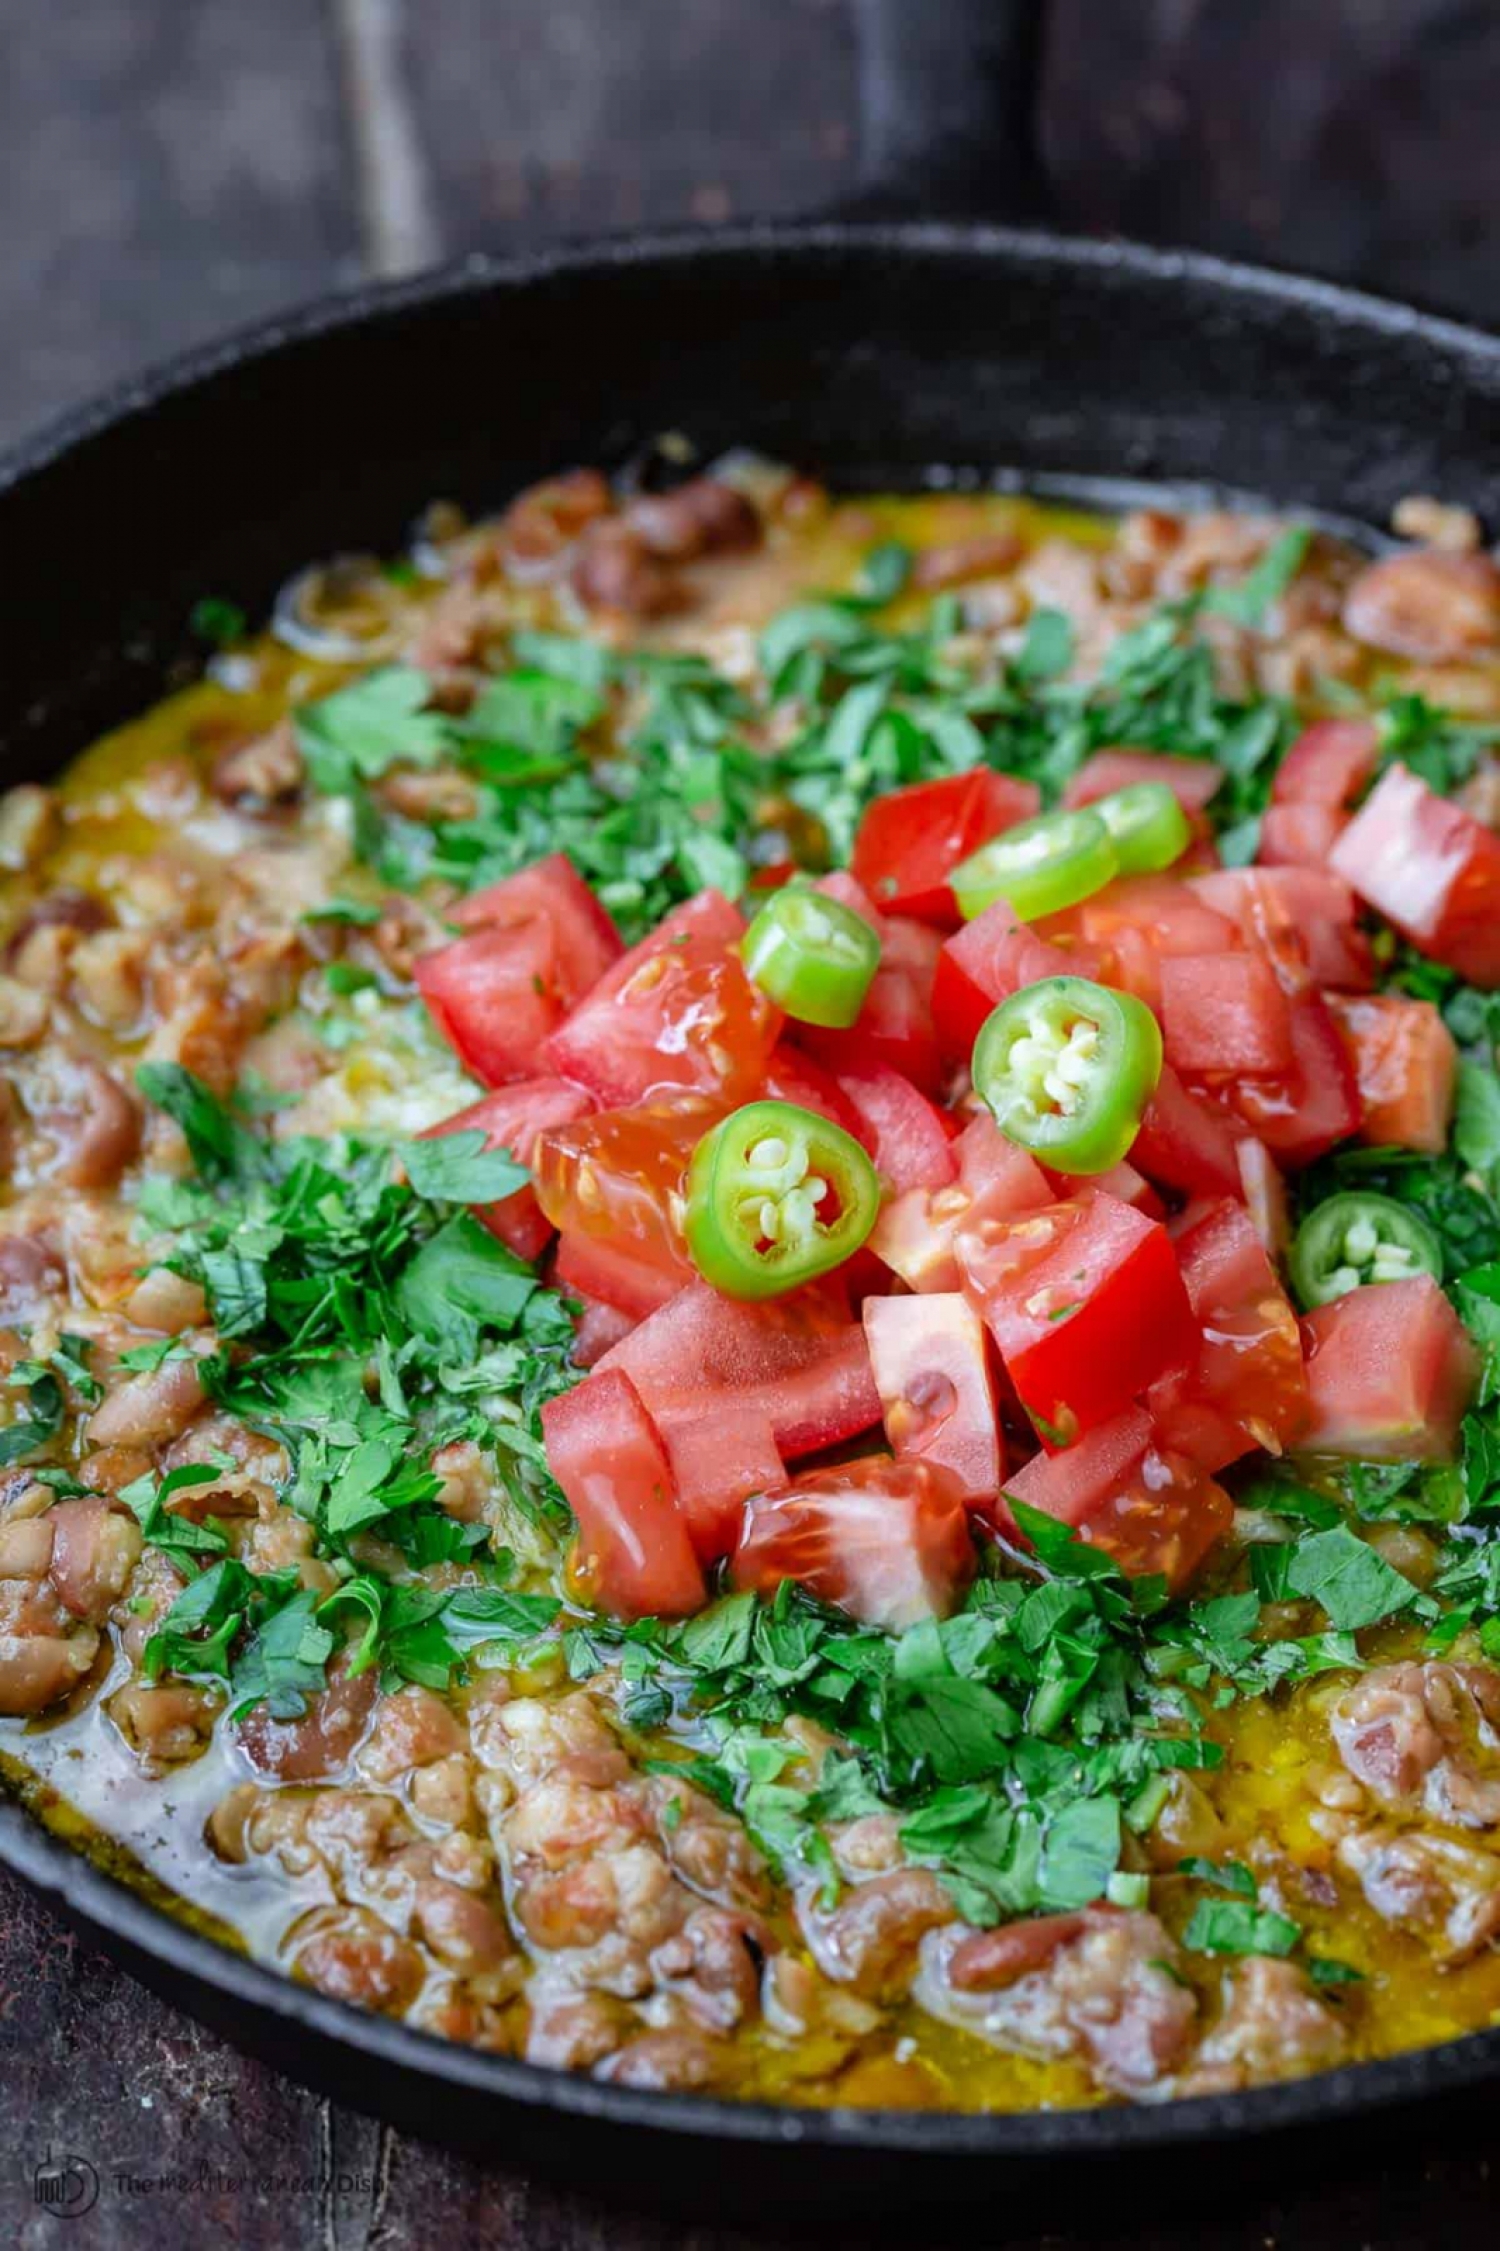 <p>This rich and satisfying dish is thought to be around since ancient times, made with a Middle Eastern and North African diet staple: fava beans. Today, it's especially popular in Egypt and even considered the national dish, commonly made with cumin, hot peppers and a garlicky lemon sauce. <a href="https://www.themediterraneandish.com/foul-mudammas-recipe/" rel="noopener">Get the recipe here.</a></p>